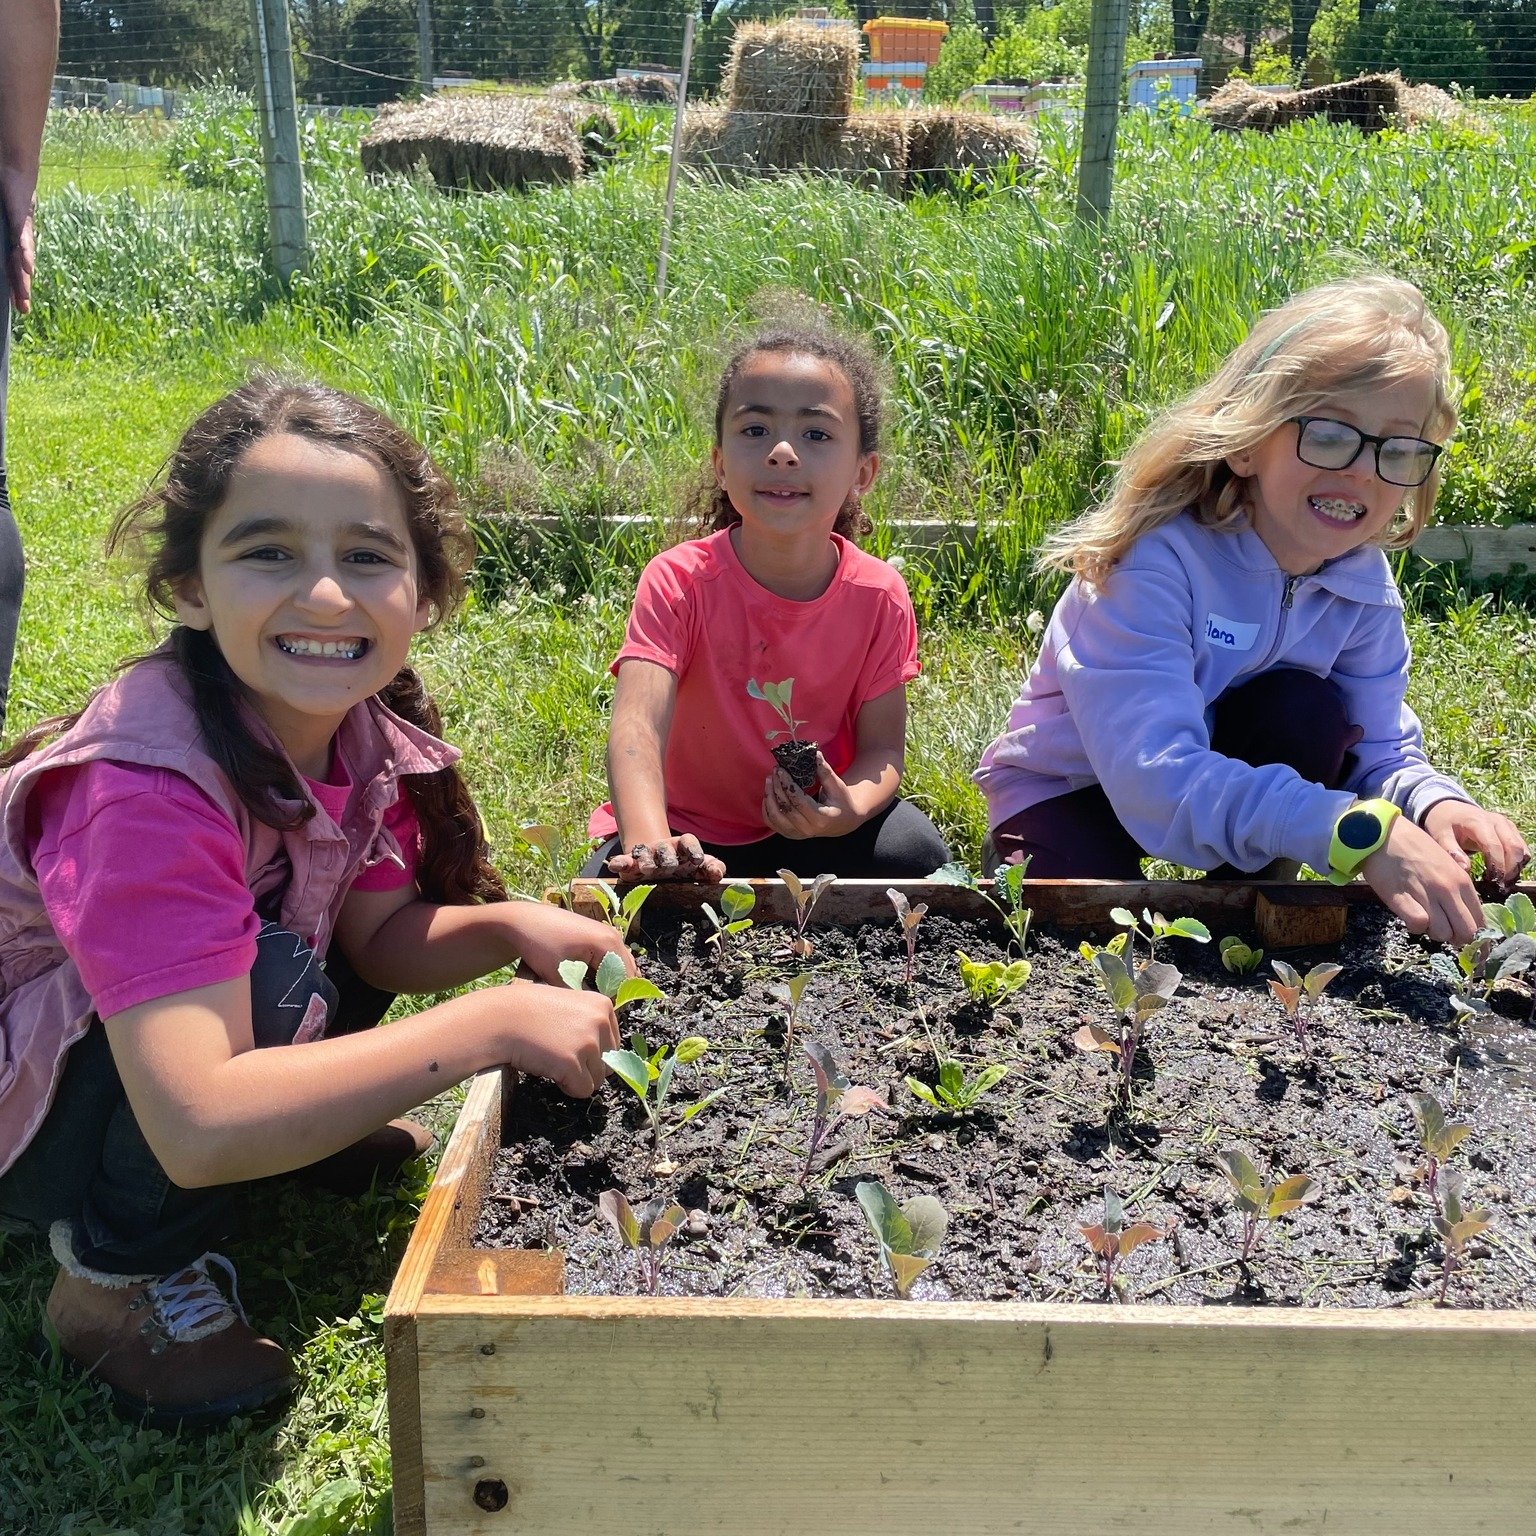 &quot;Bloomfield Hills Schools&rsquo; second-grade students have been studying plants all year long, but lately they have been getting their hands dirty at Bowers Farm during spring field trips, exploring the science behind plants. Plants are the bac